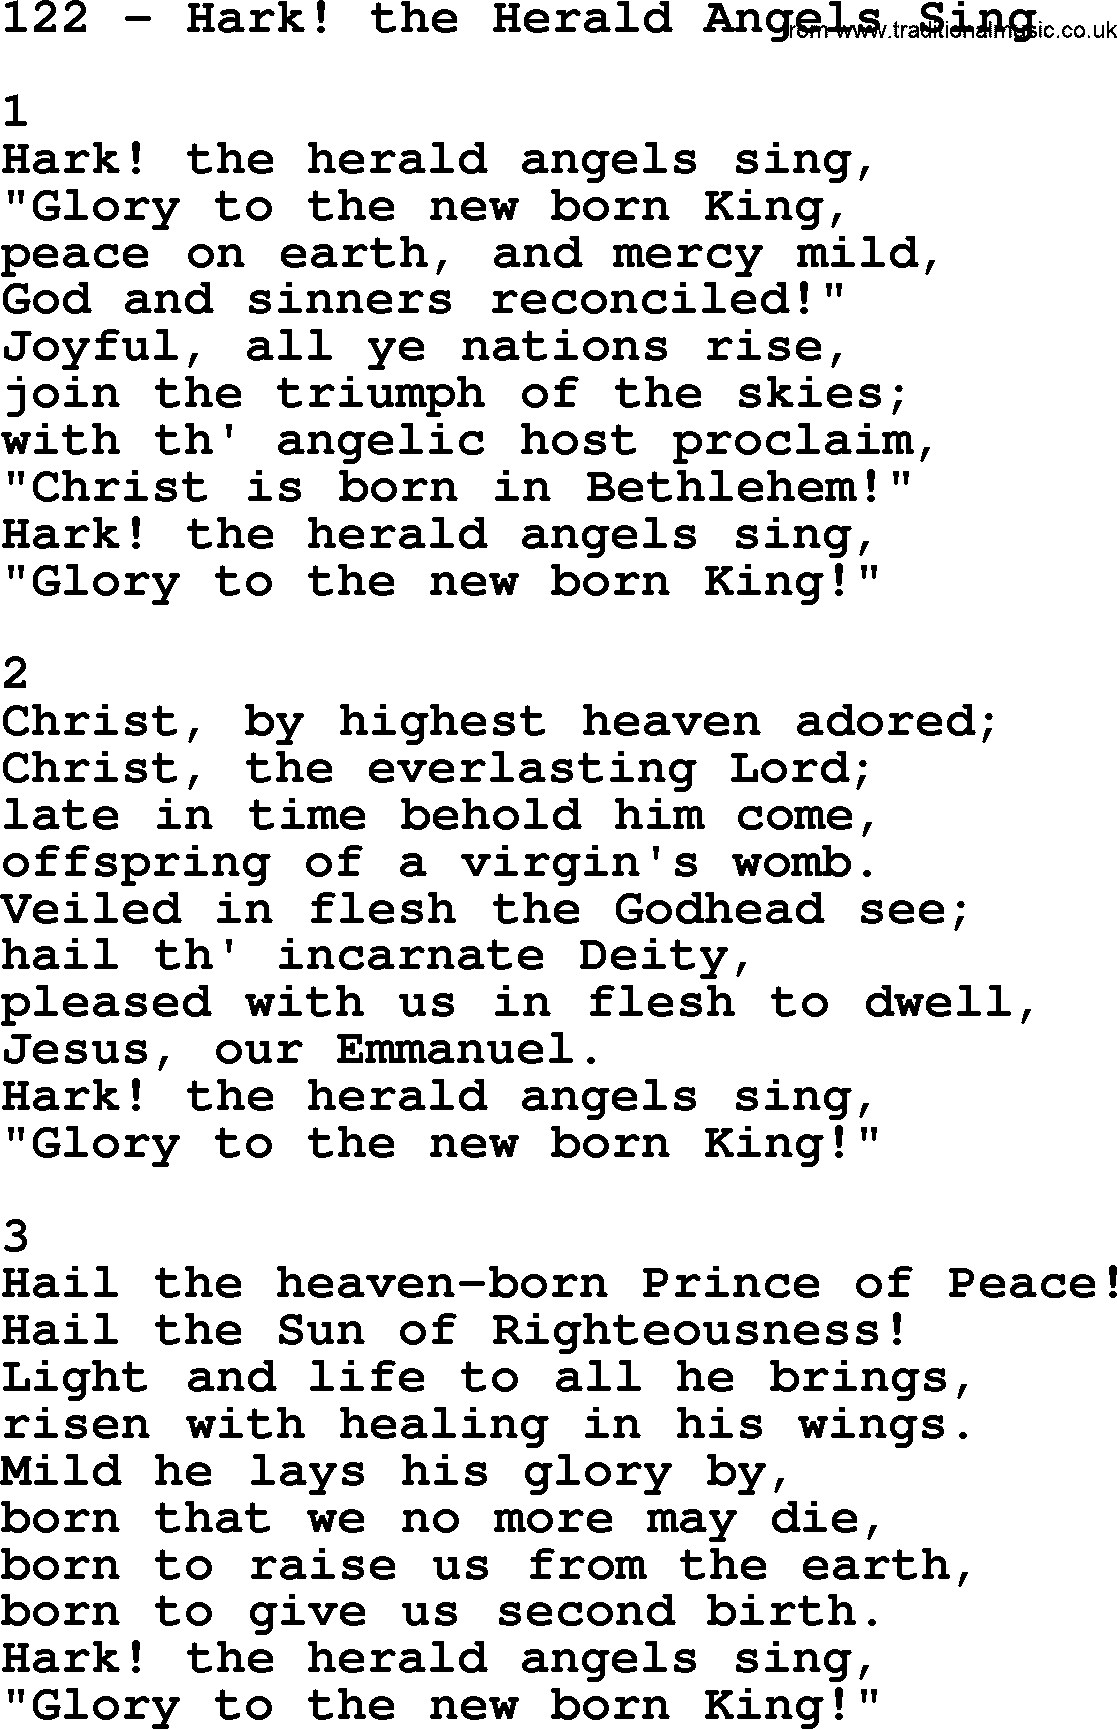 Adventist Hymnal, Song 122Hark! The Herald Angels Sing, with Lyrics